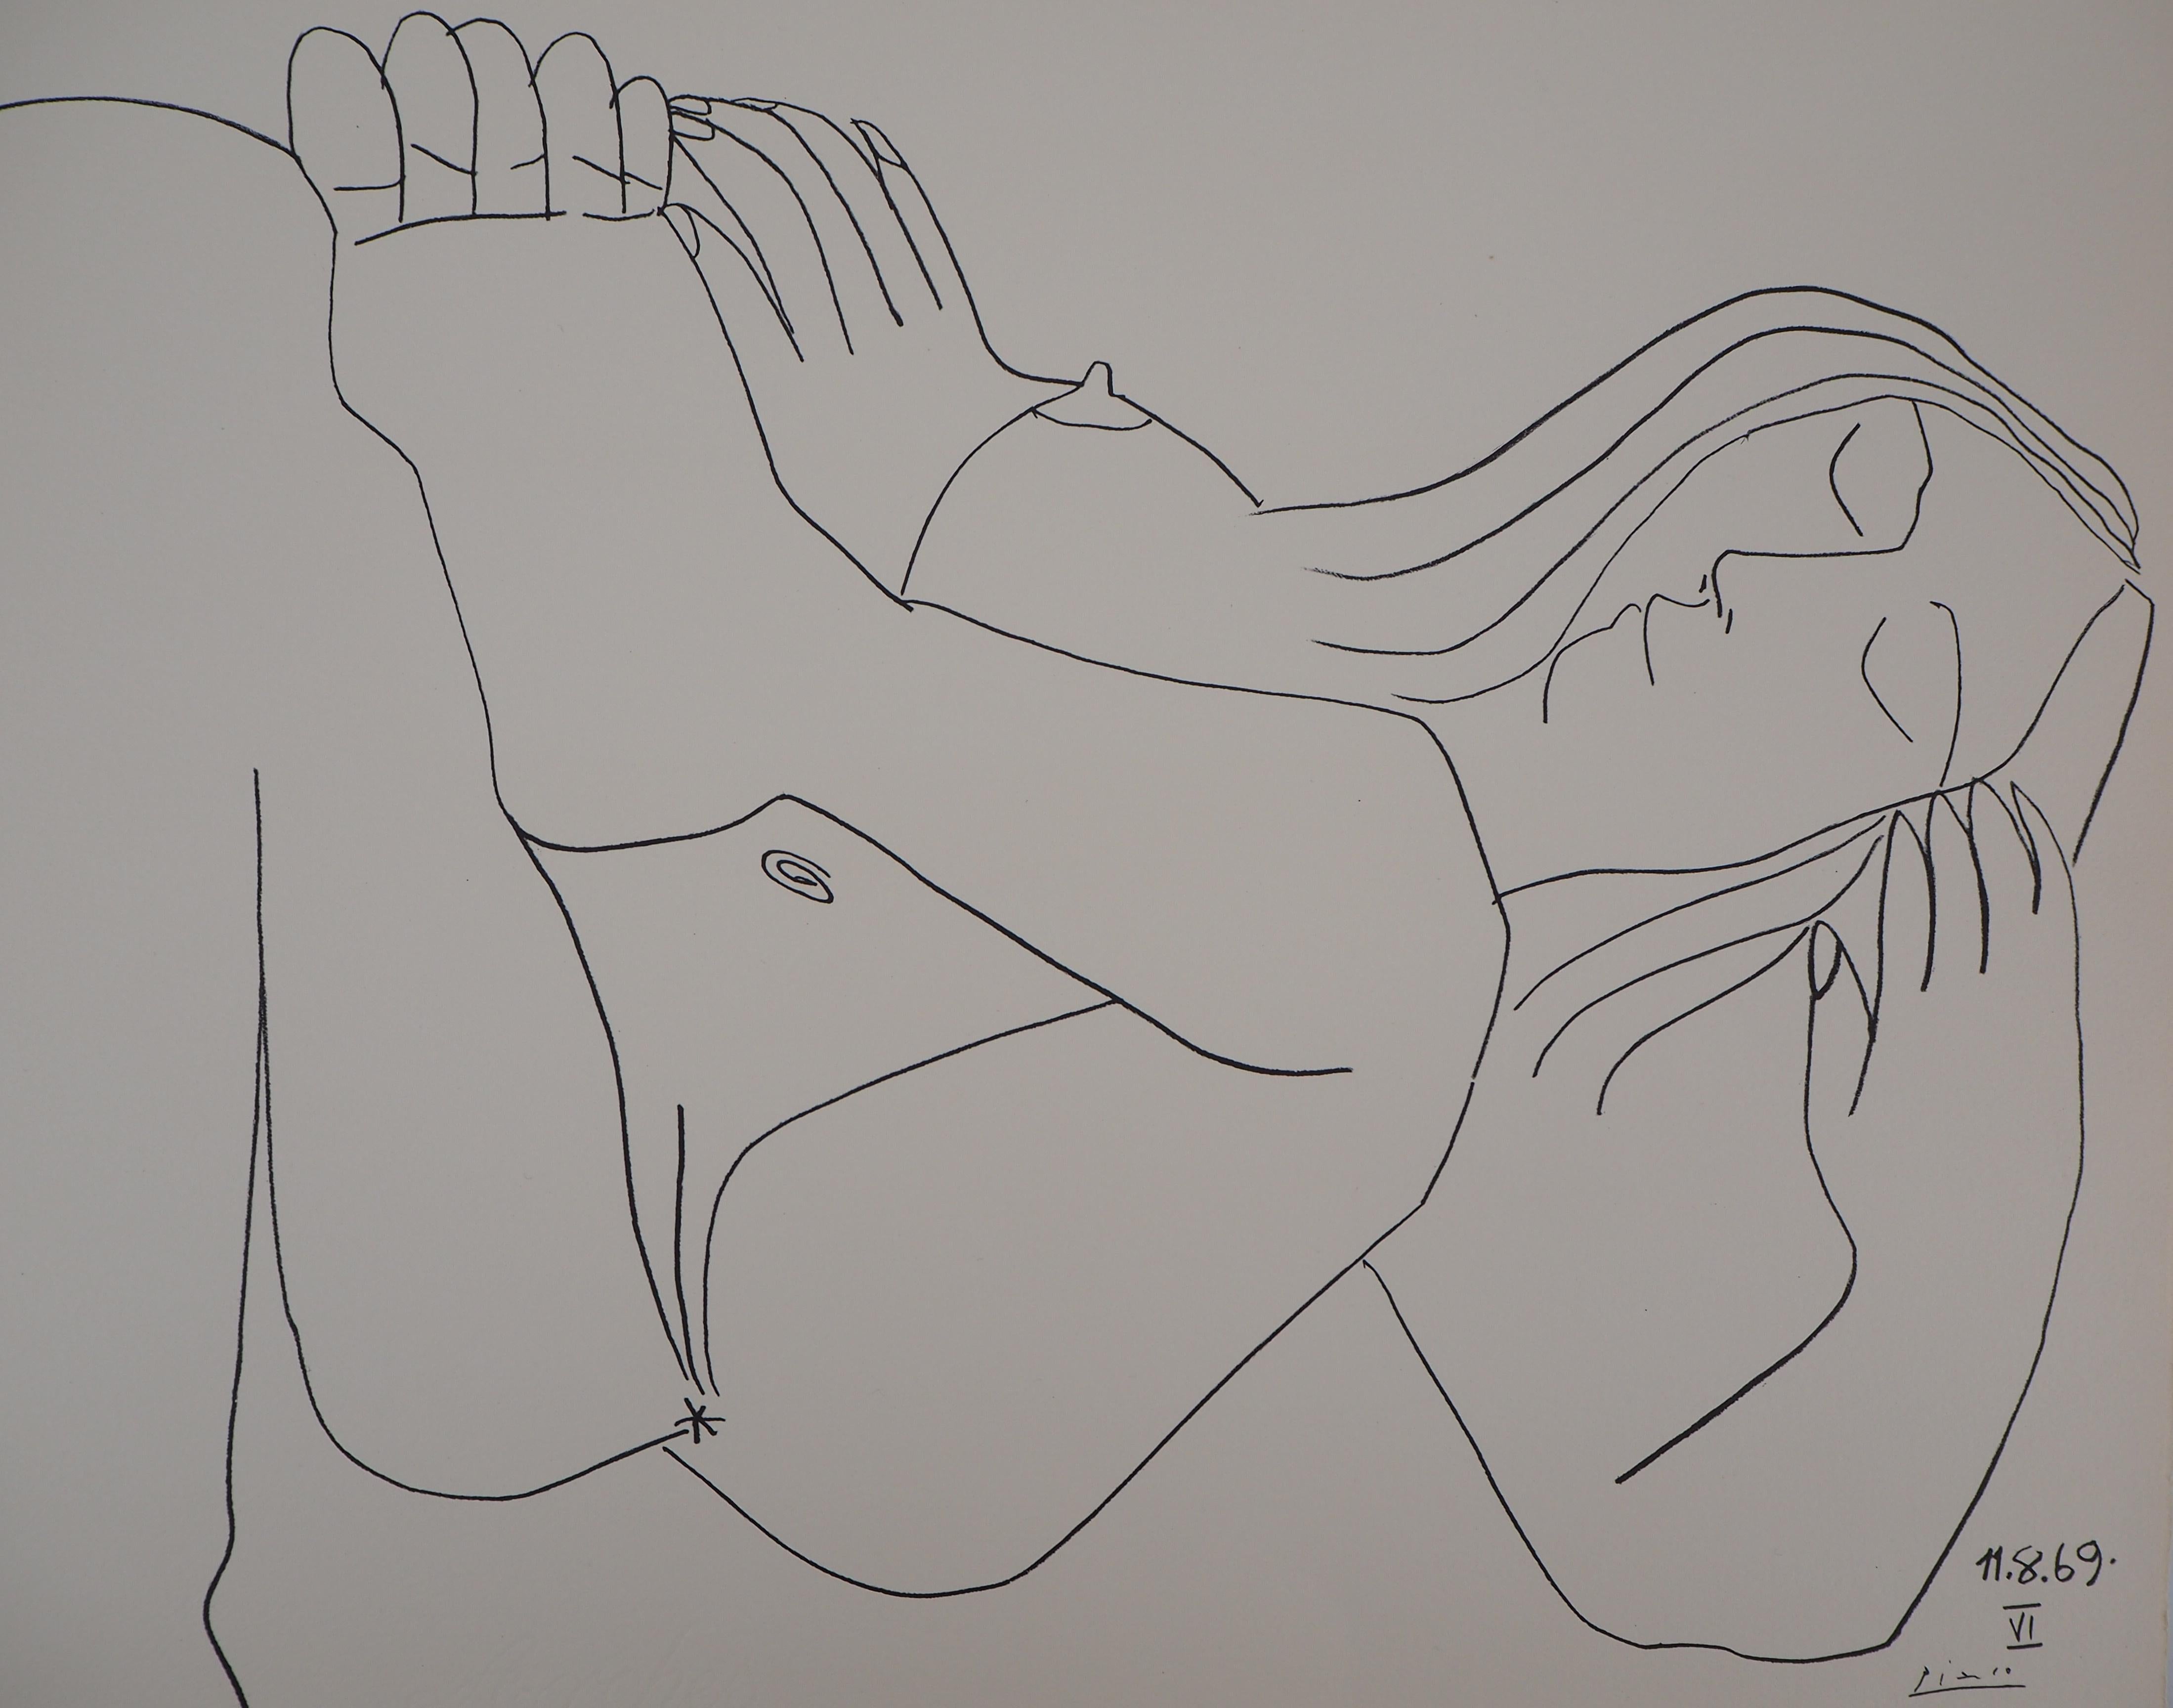 Woman Resting - Lithograph (Mourlot 1971) - Modern Print by Pablo Picasso